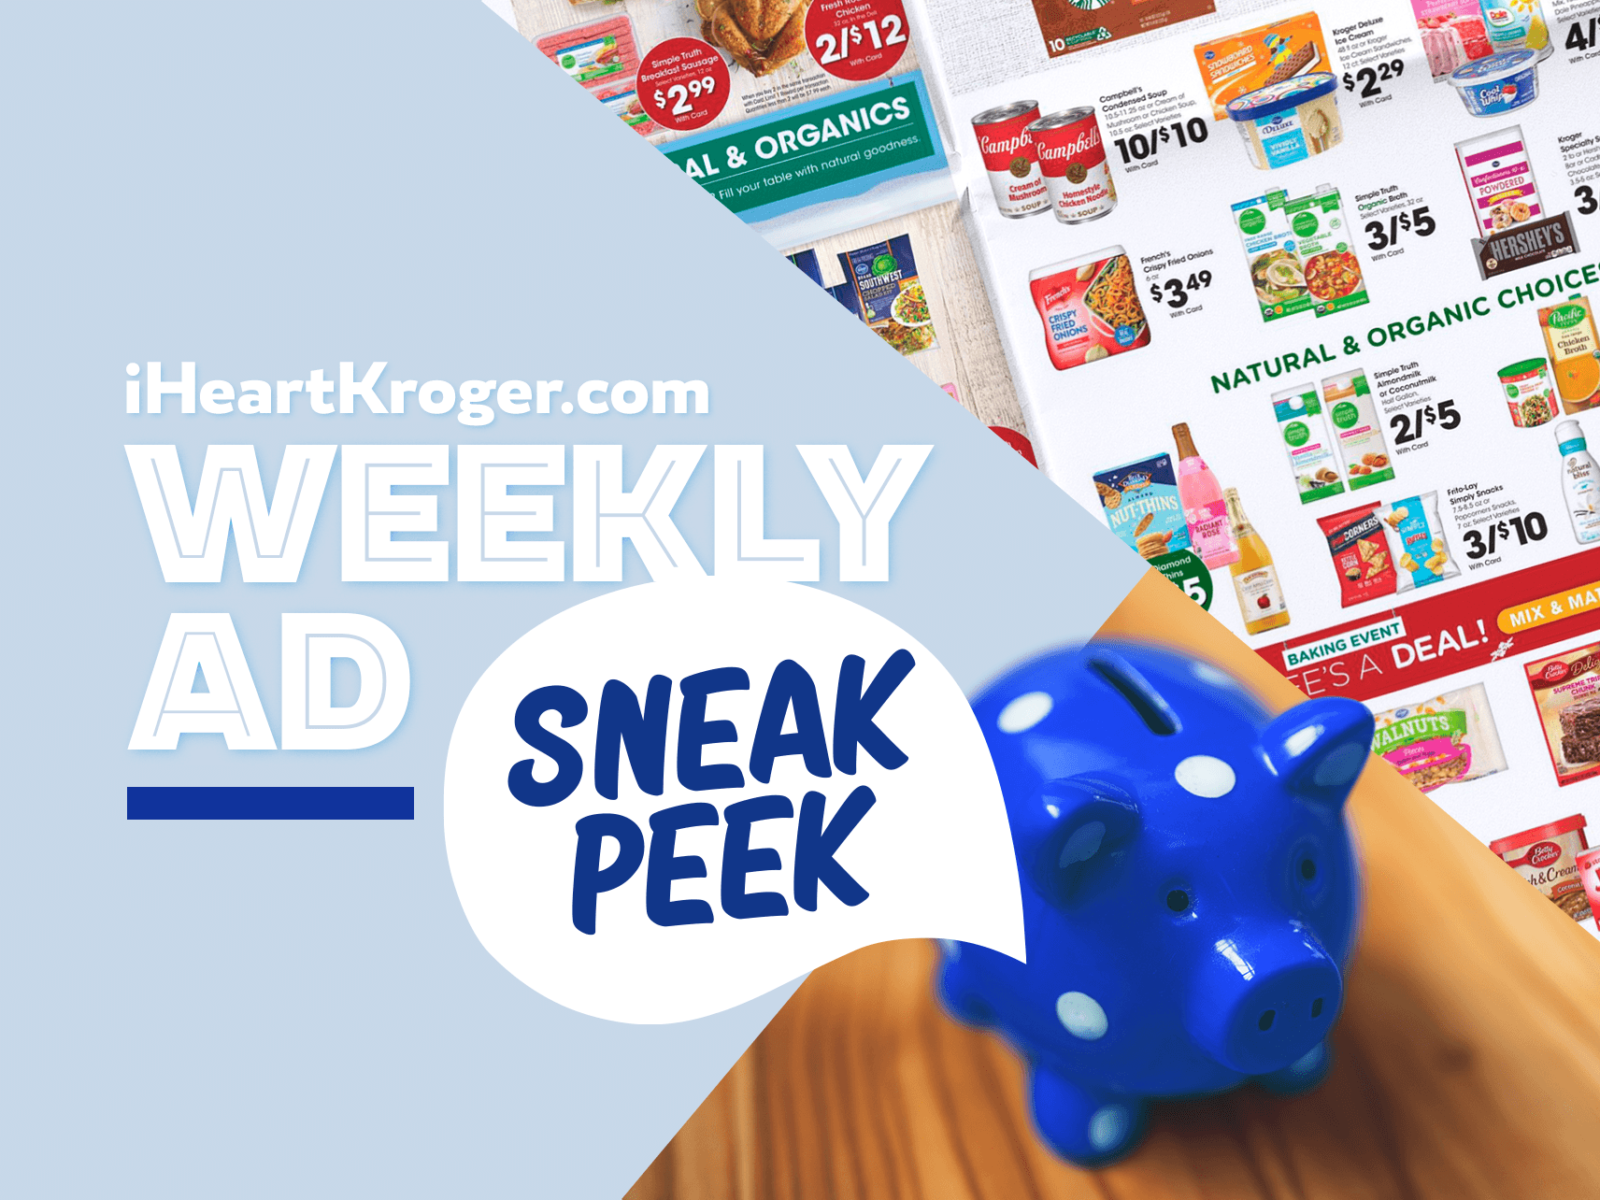 Kroger Ad & Coupons Week Of 1/18 to 1/24 – Mega Sale Continues!